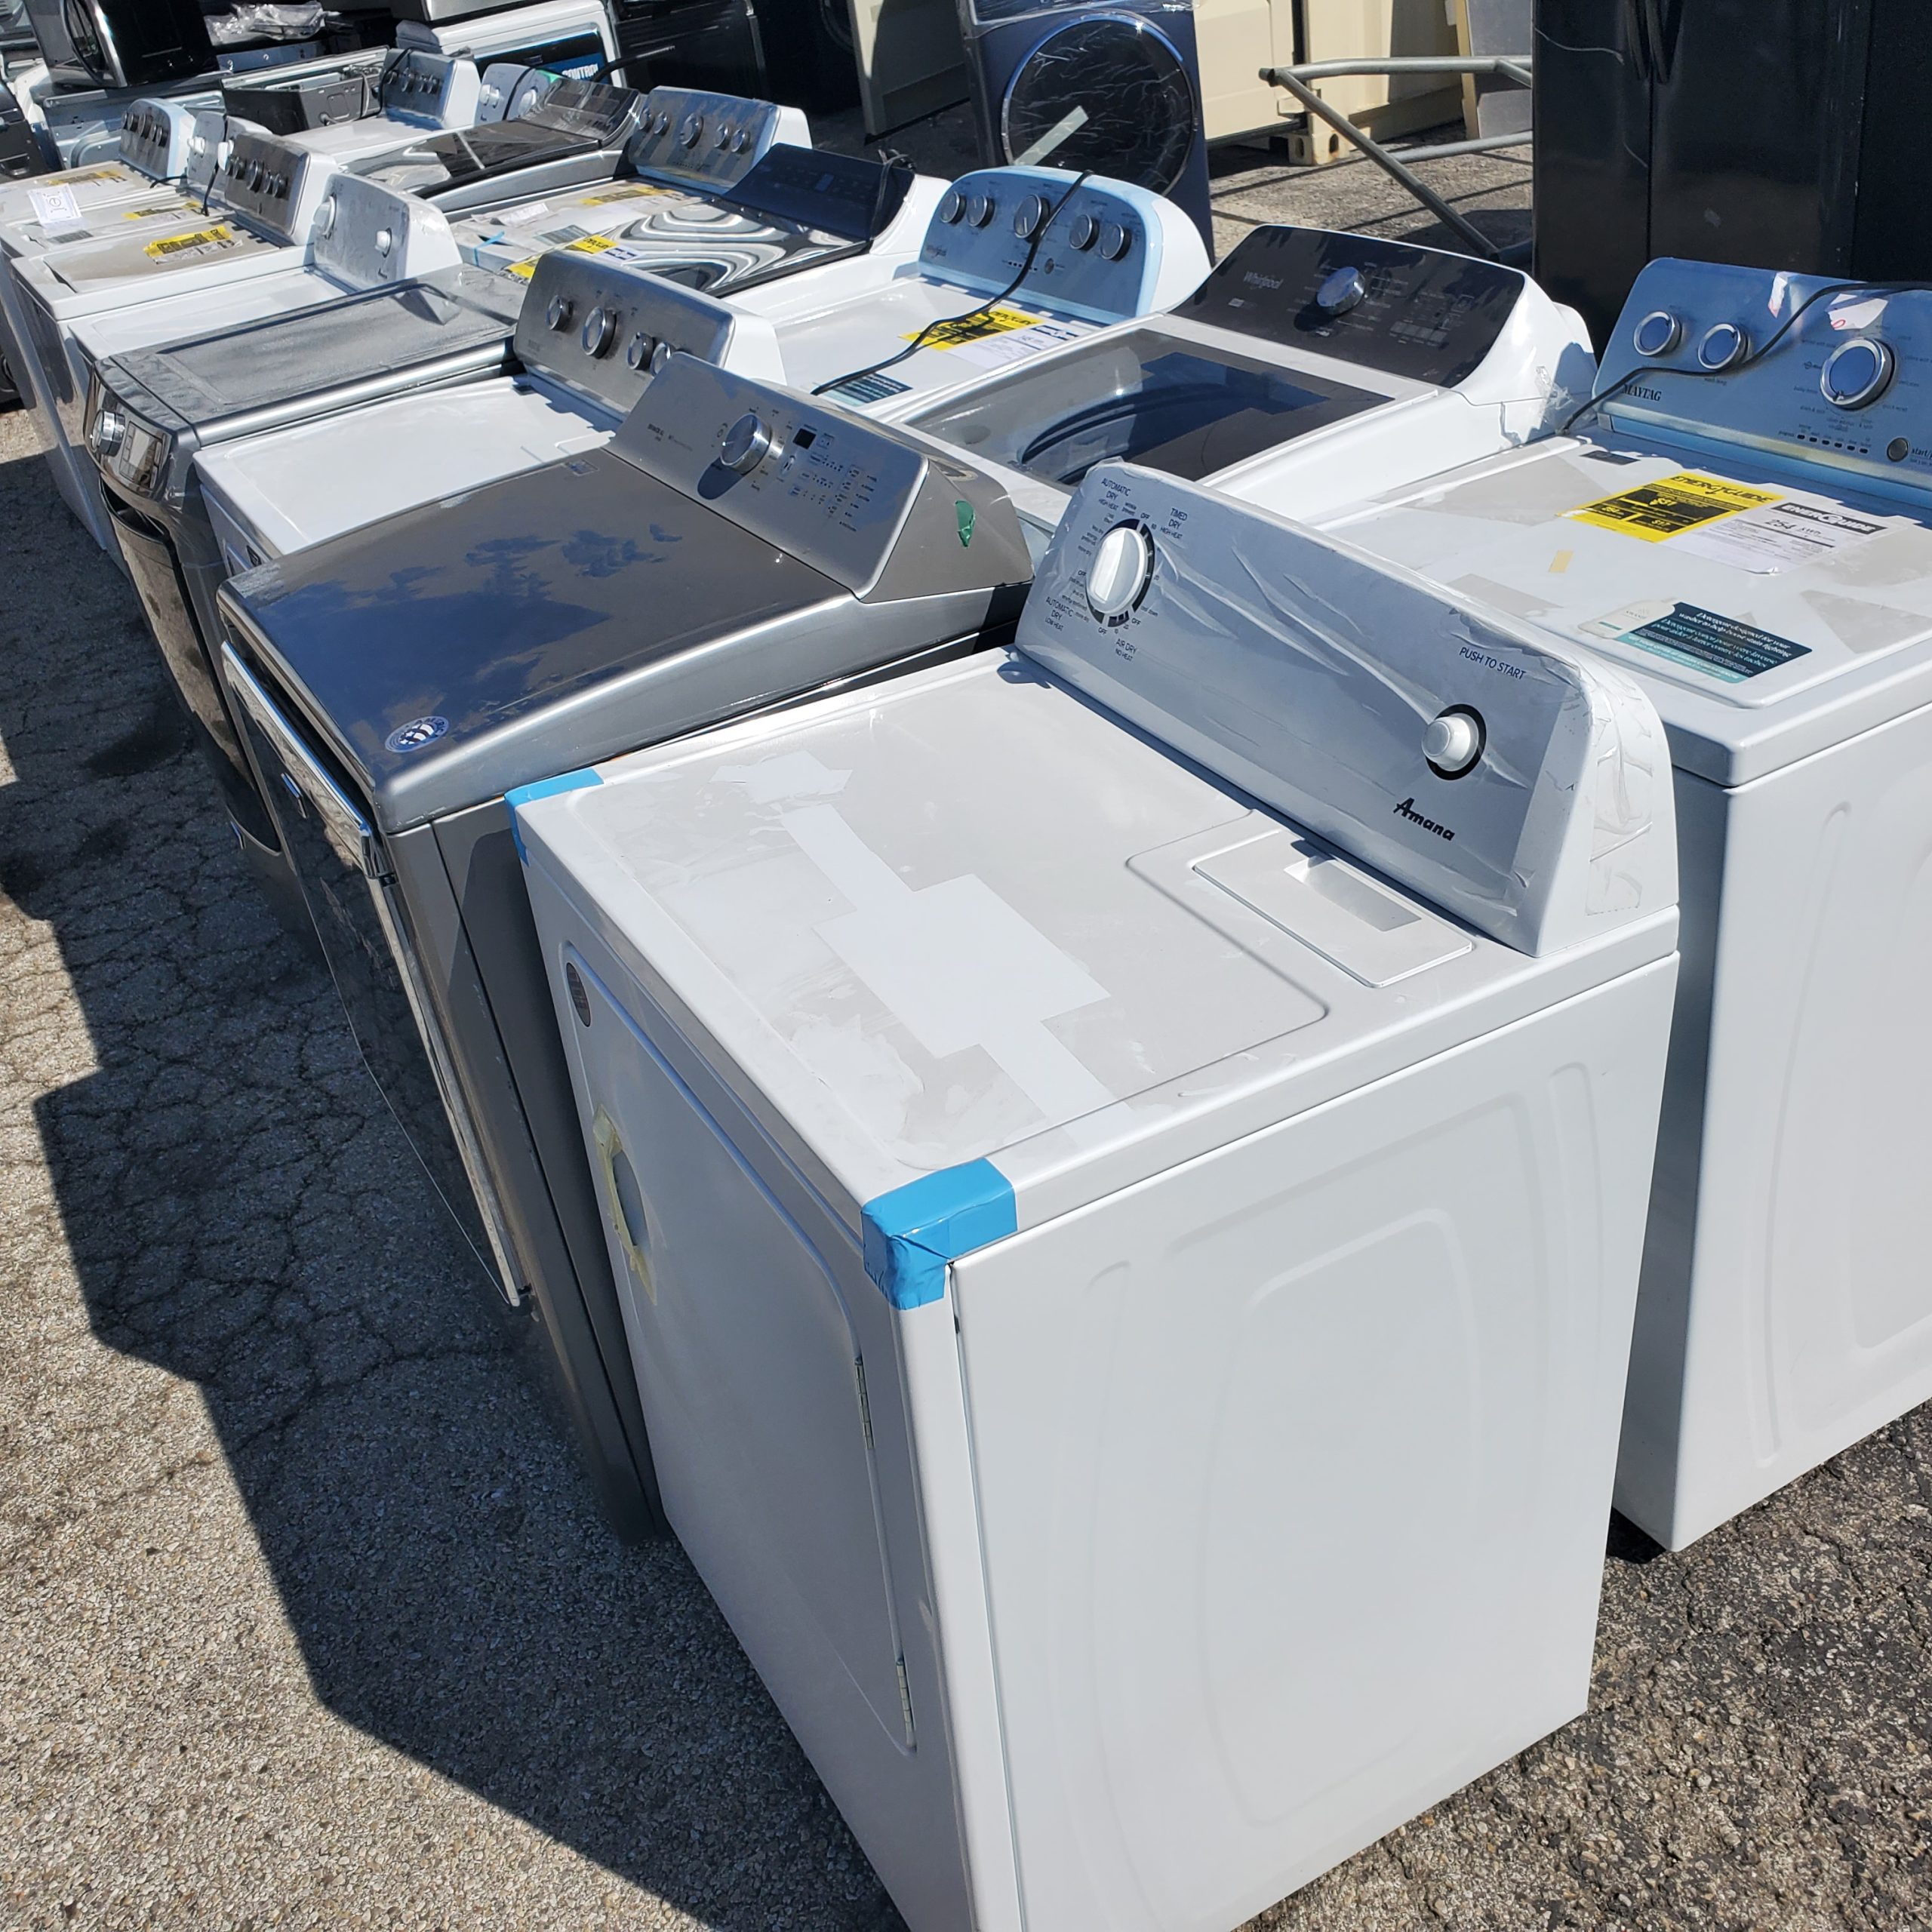 pictures of More Whirlpool scratch and dent laundry appliances (Washers and dryers) by the truckload.